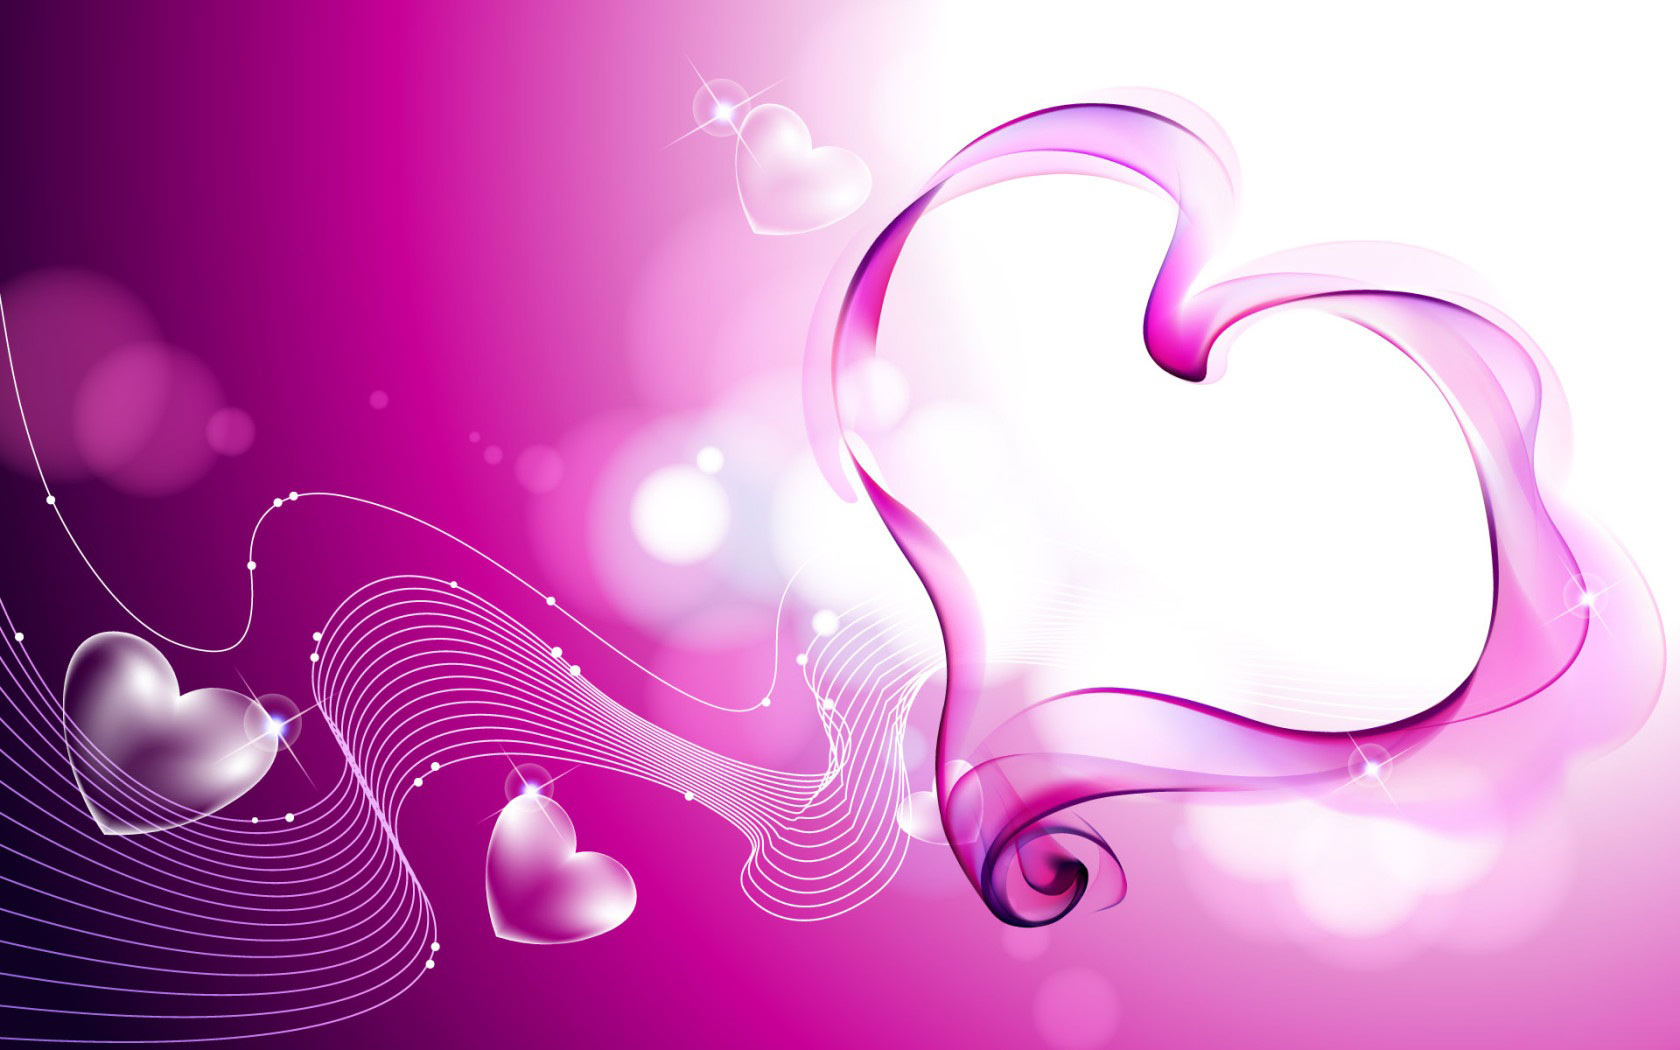 Free Download Love Wallpaper Background Hd For Pc Mobile Phone Download Desktop 1680x1050 For Your Desktop Mobile Tablet Explore 73 Love Pink Backgrounds Pink Backgrounds Wallpaper Cool Love Pink